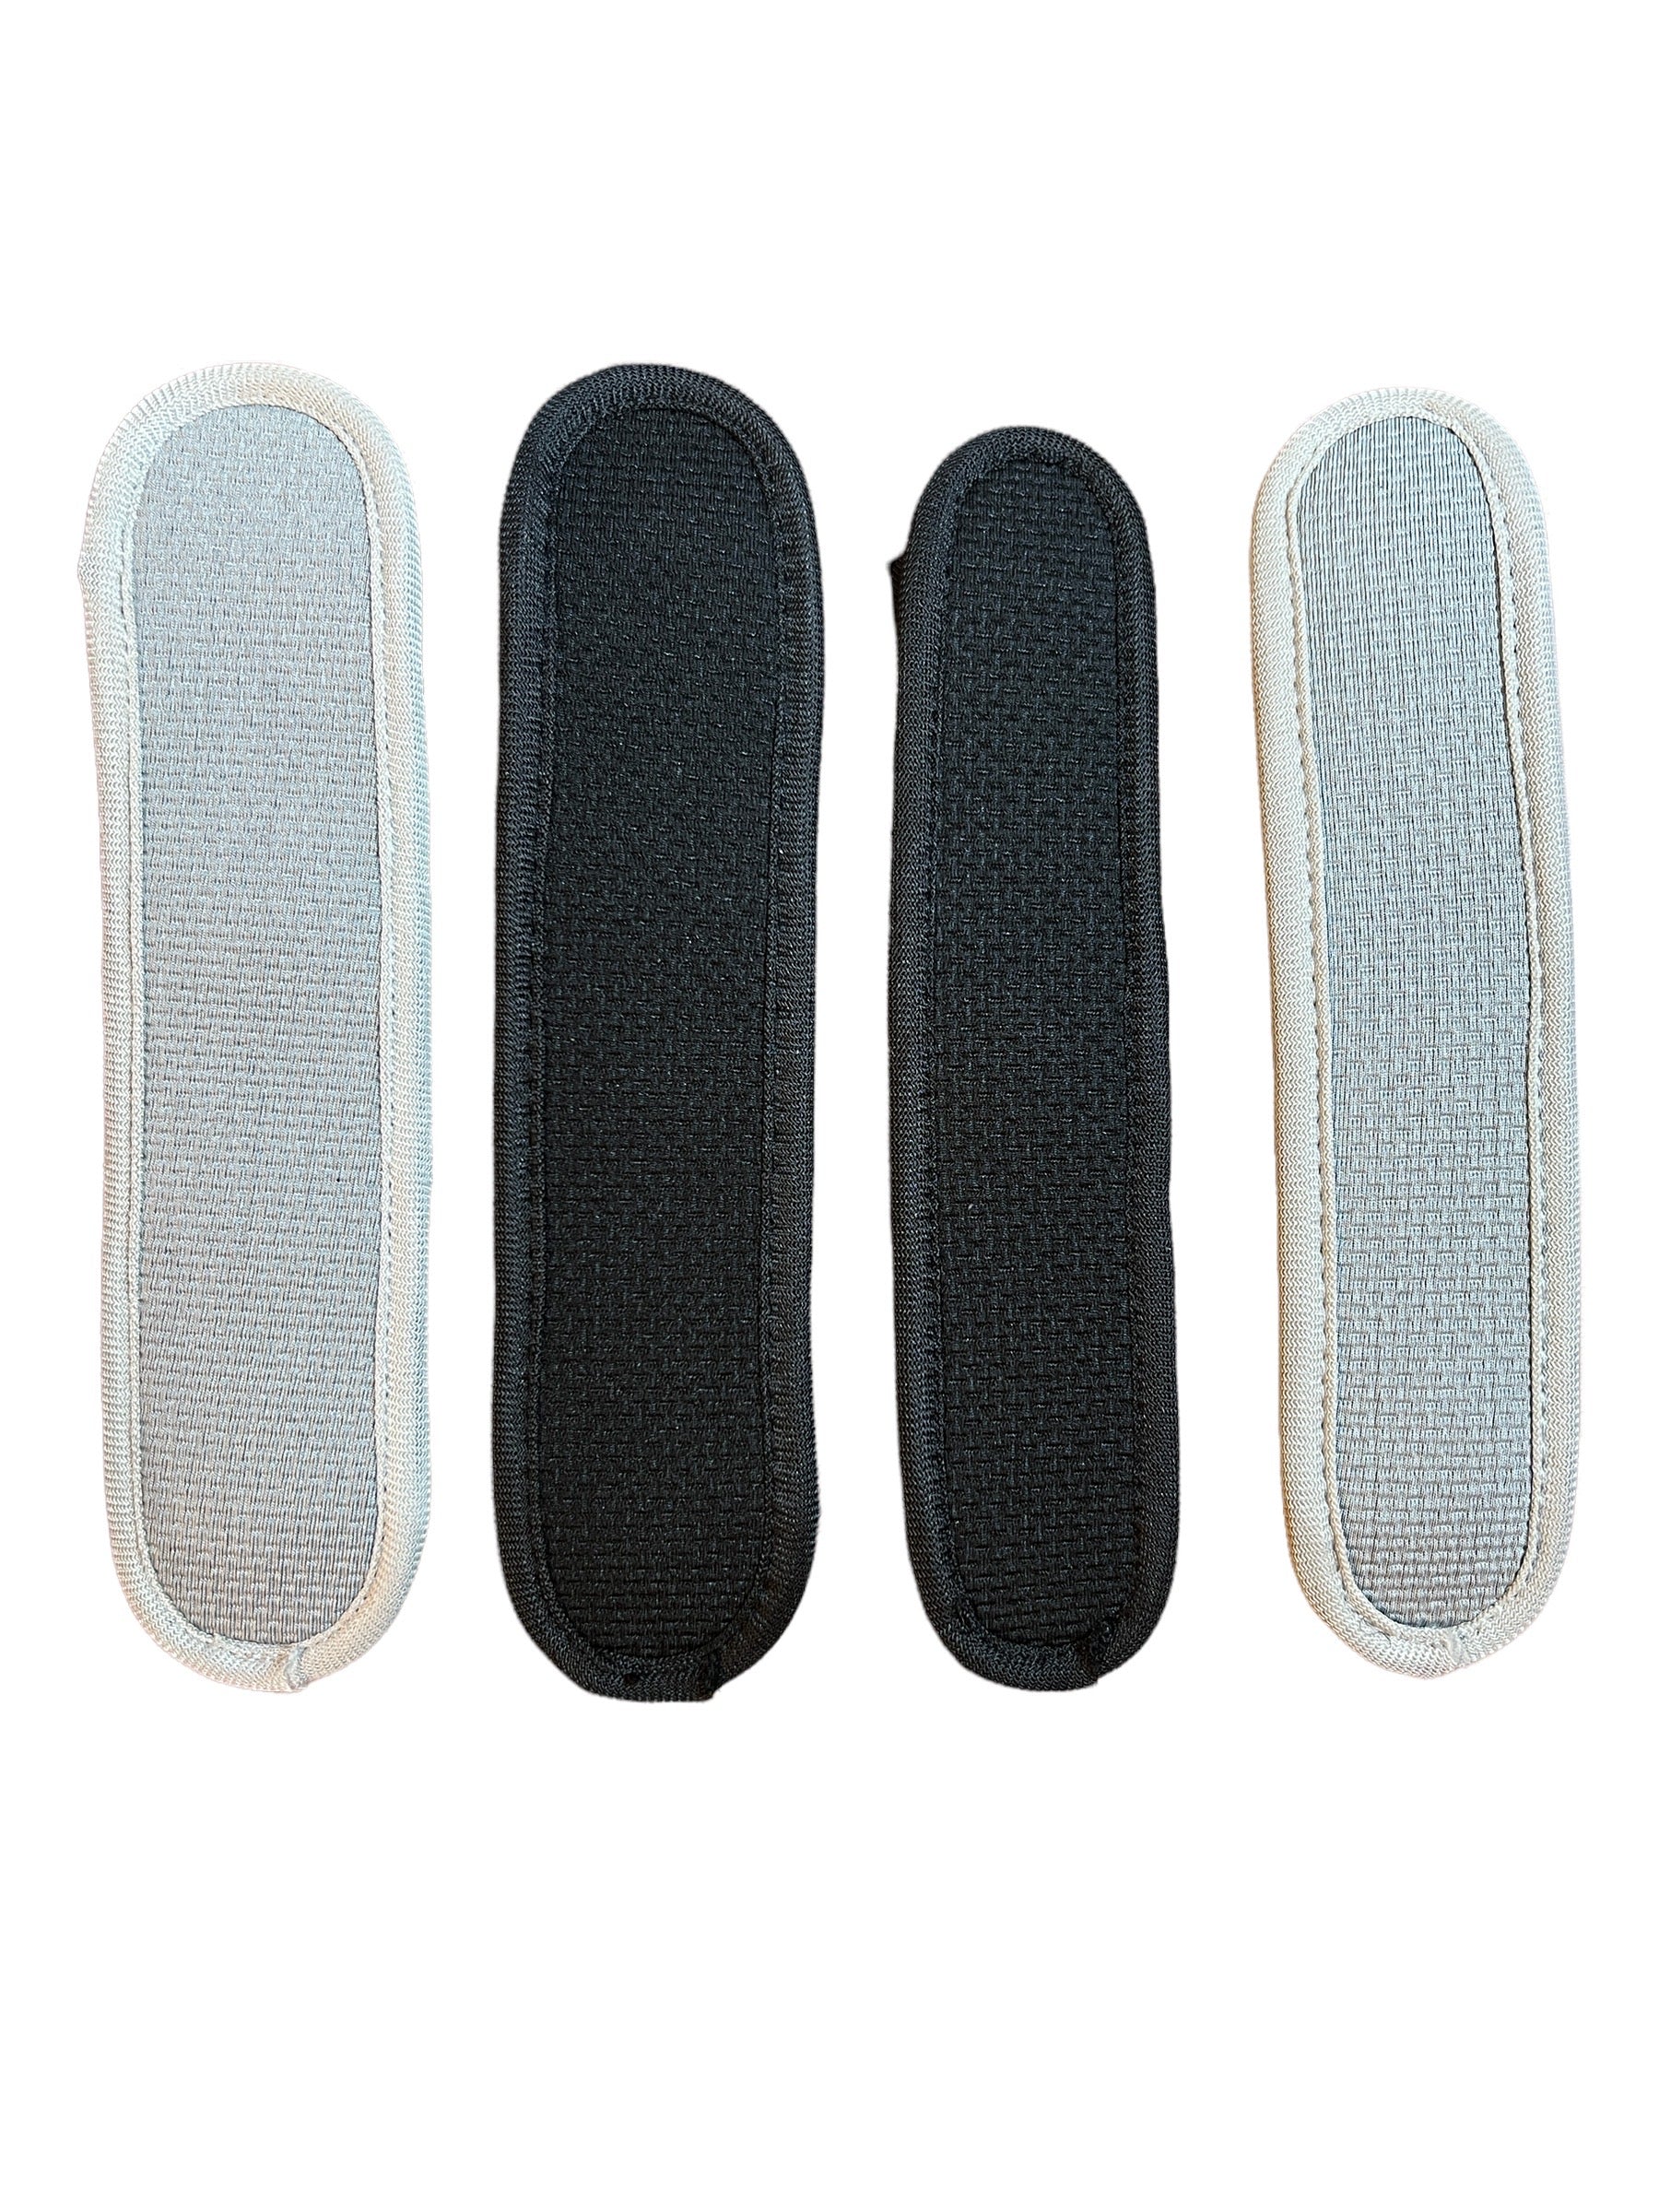 CentralSound Universal Mesh and Zipper Headband Pad Cover Part for Headphones and Headsets - CentralSound